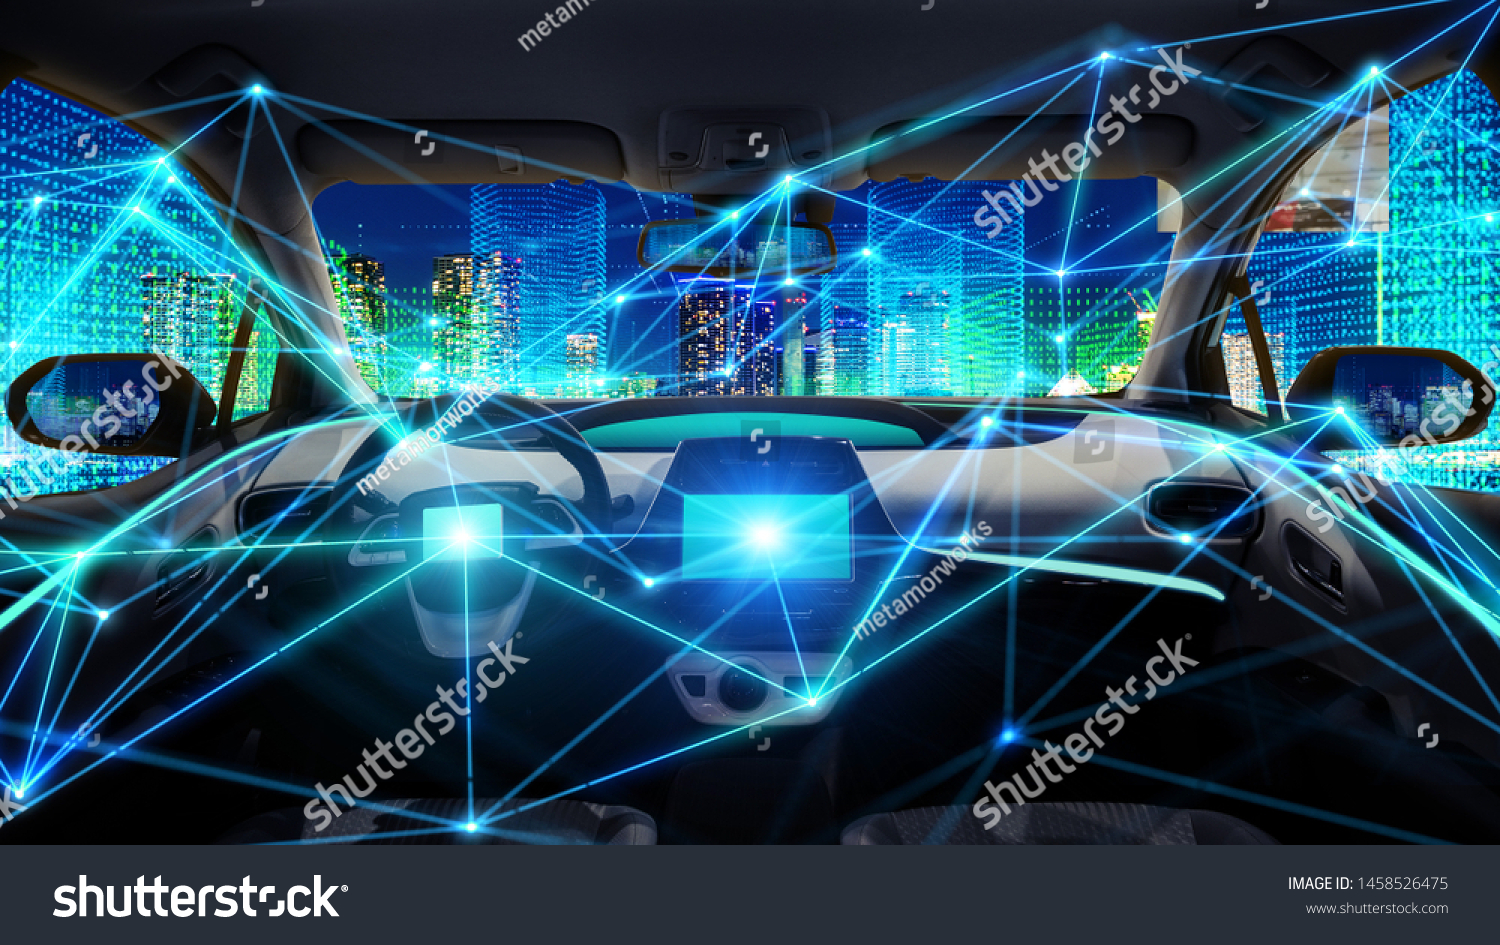 Interior of autonomous car. Driverless vehicle. Self driving. UGV. Advanced driver assistant system. #1458526475